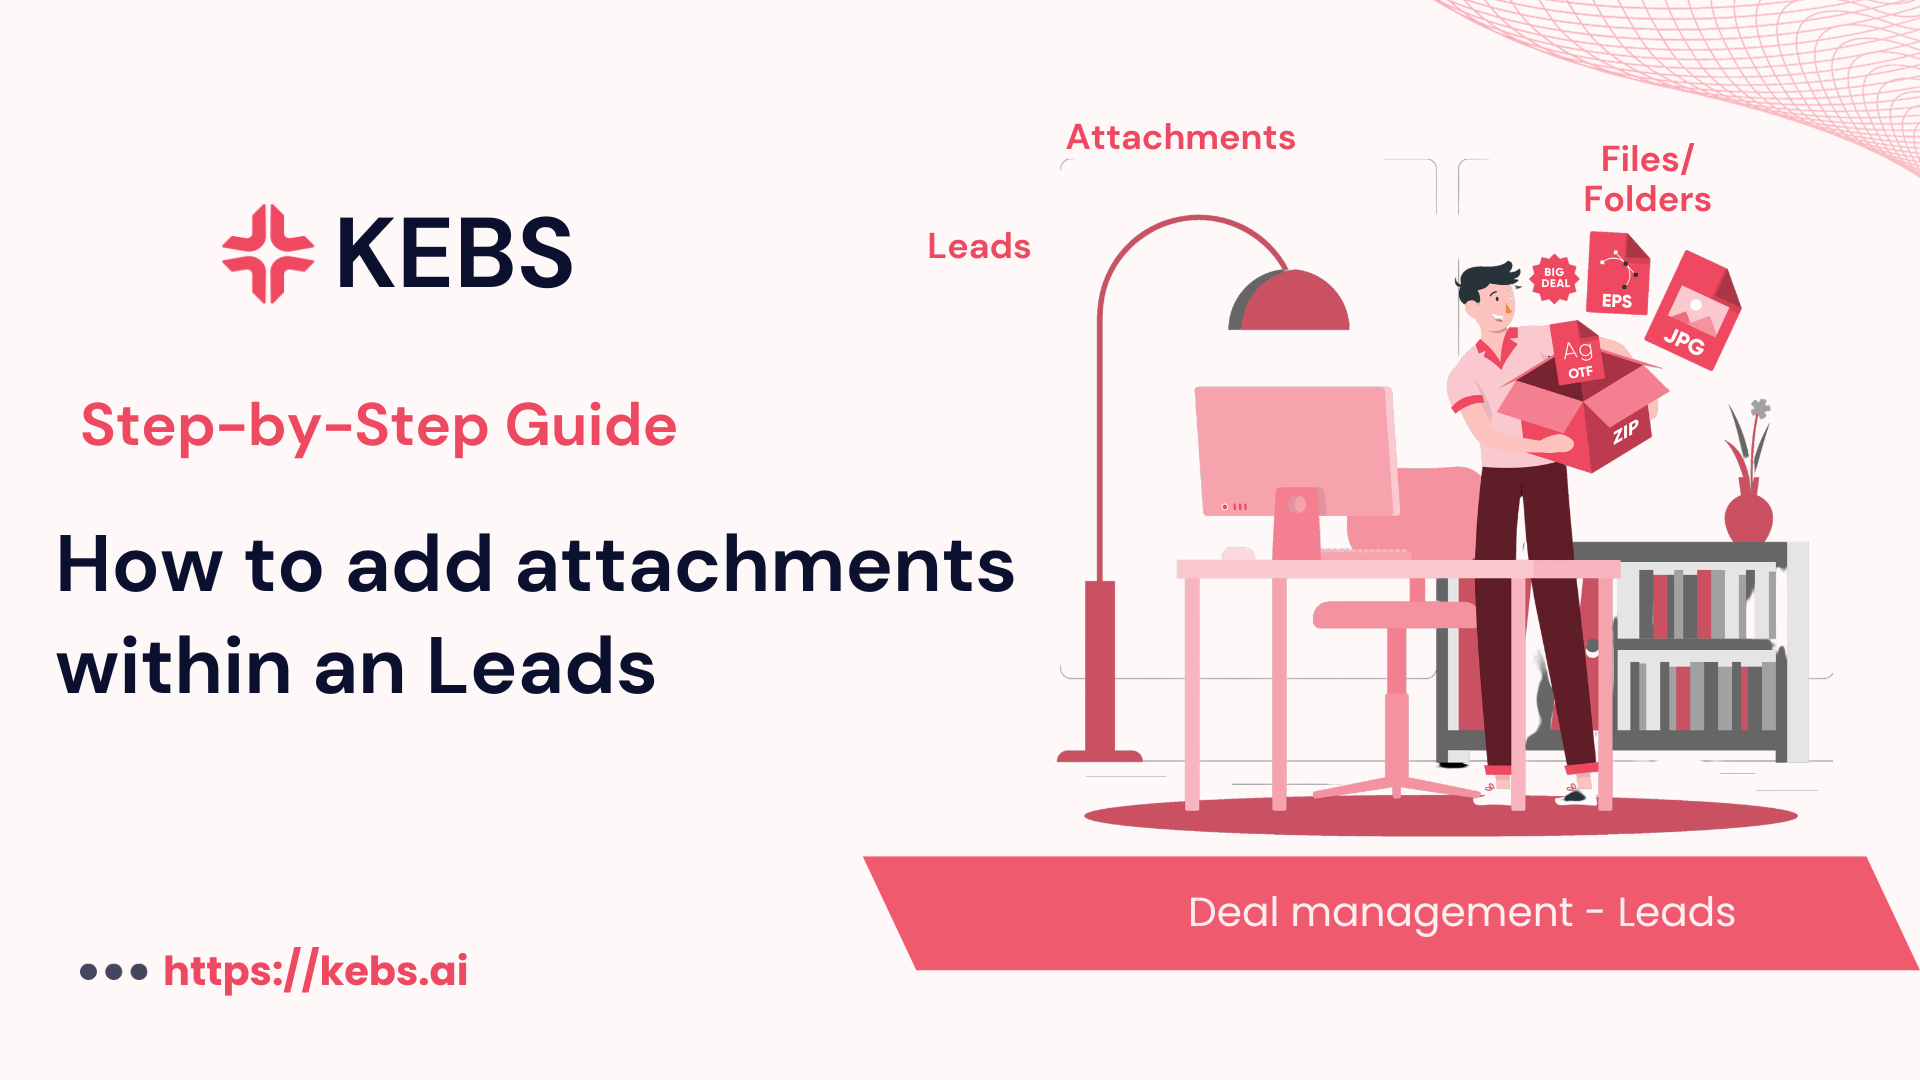 How to add attachments within an Leads